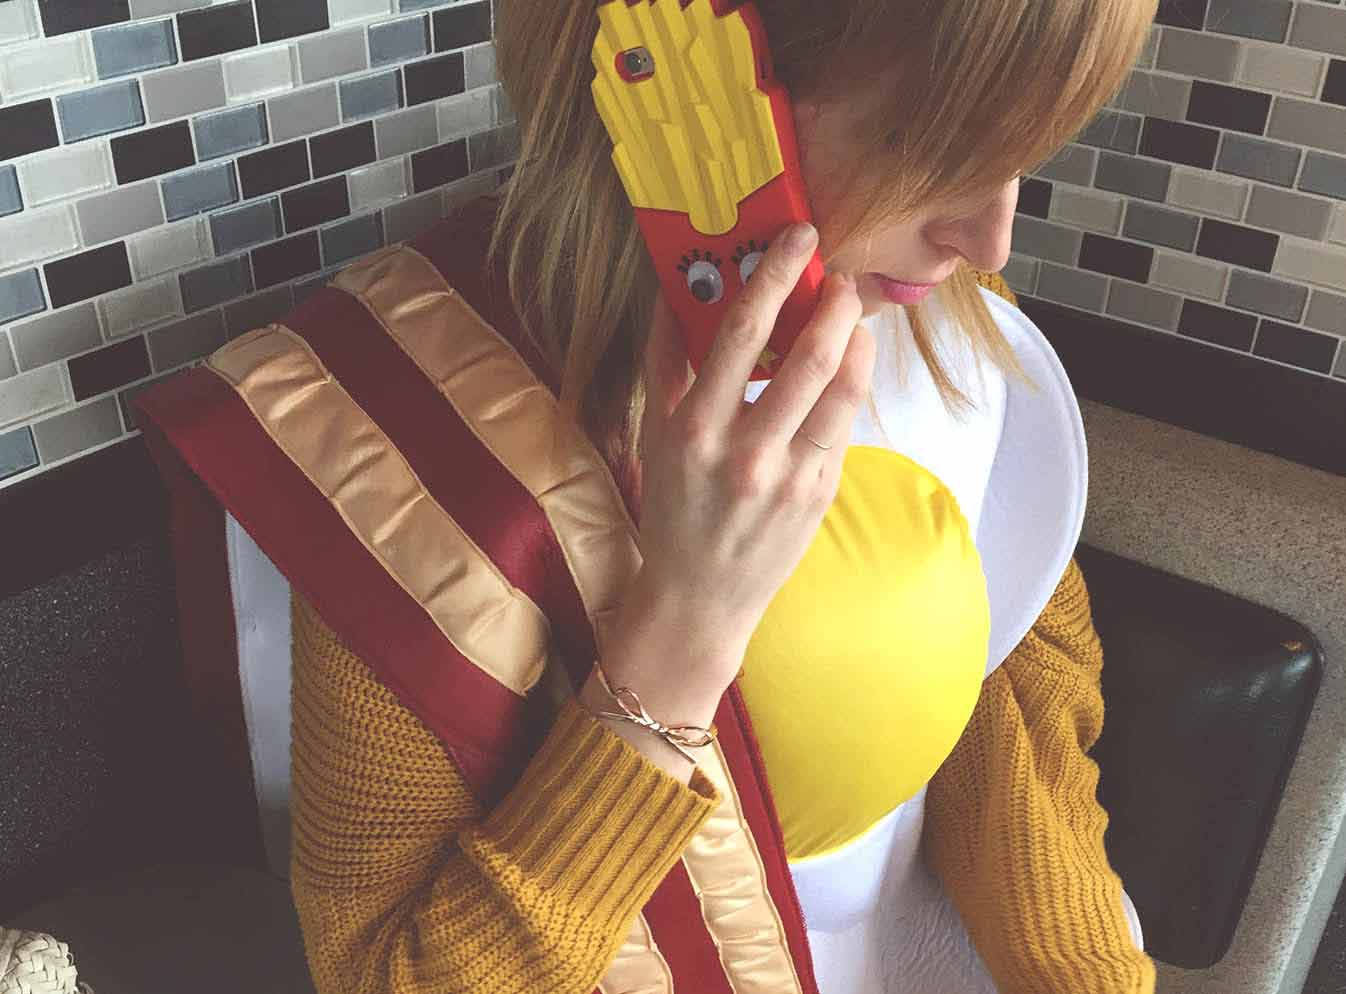 Girl in egg costume talking on mobile phone with french fry case